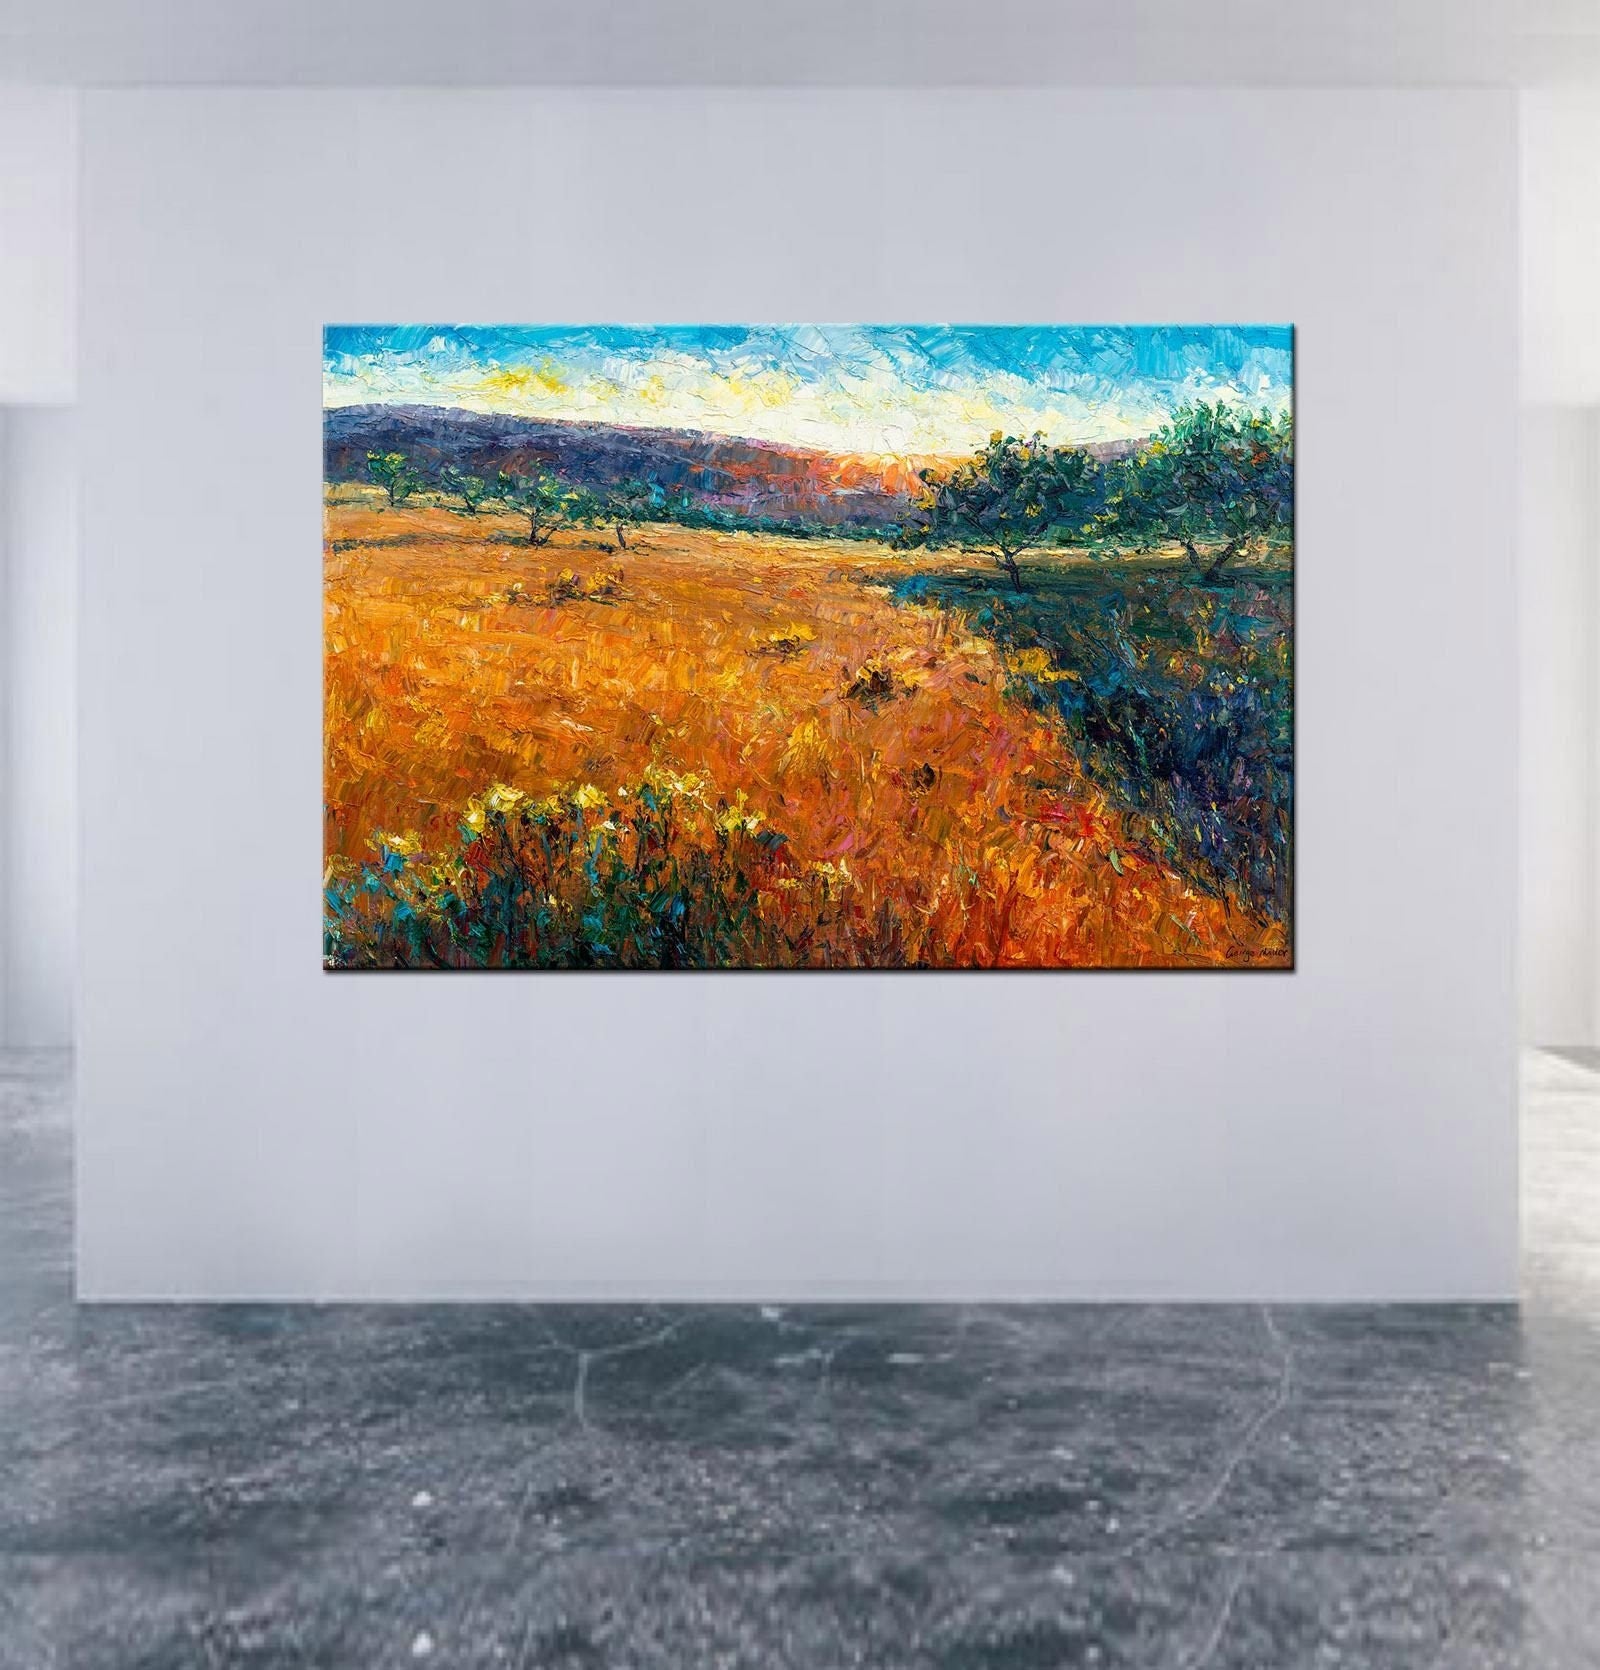 Large Oil Painting Tuscany Sunset, Painting Wall Art, Canvas Art, Large Landscape Painting, Modern Wall Art, Contemporary Art, Original Art